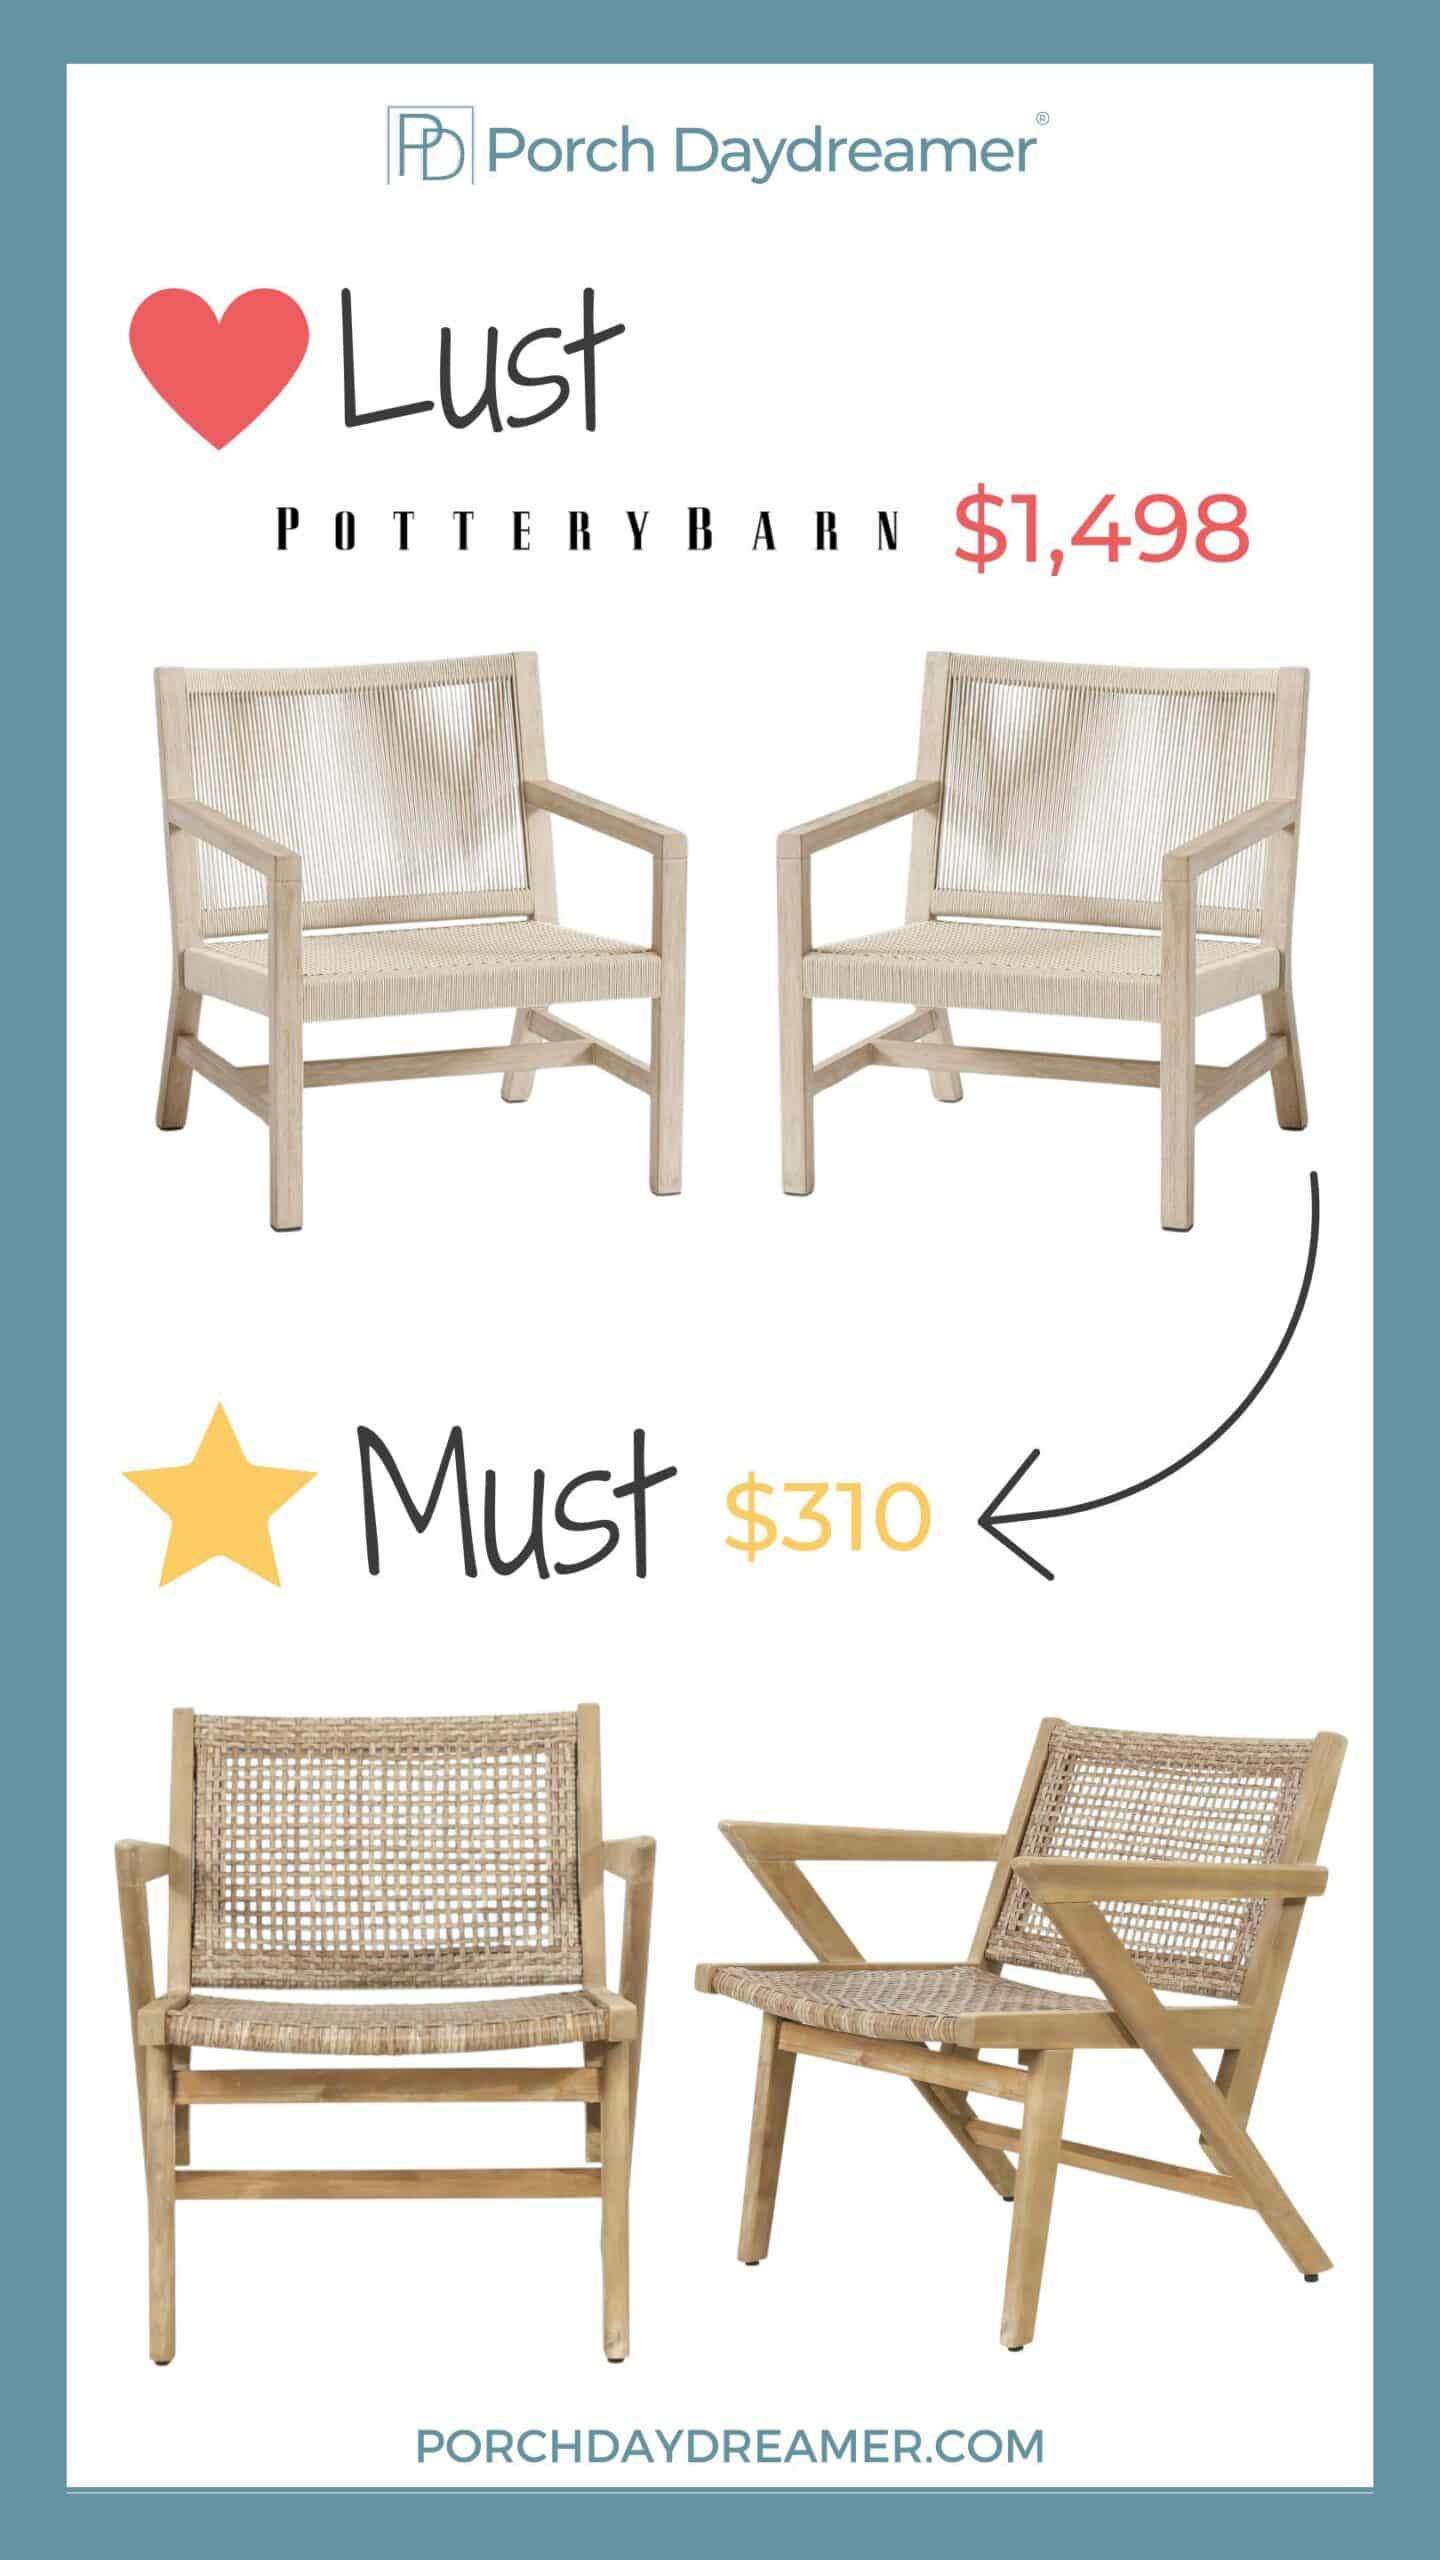 4 SECRETS to Buying Outdoor Furniture for Less! - Porch Daydreamer